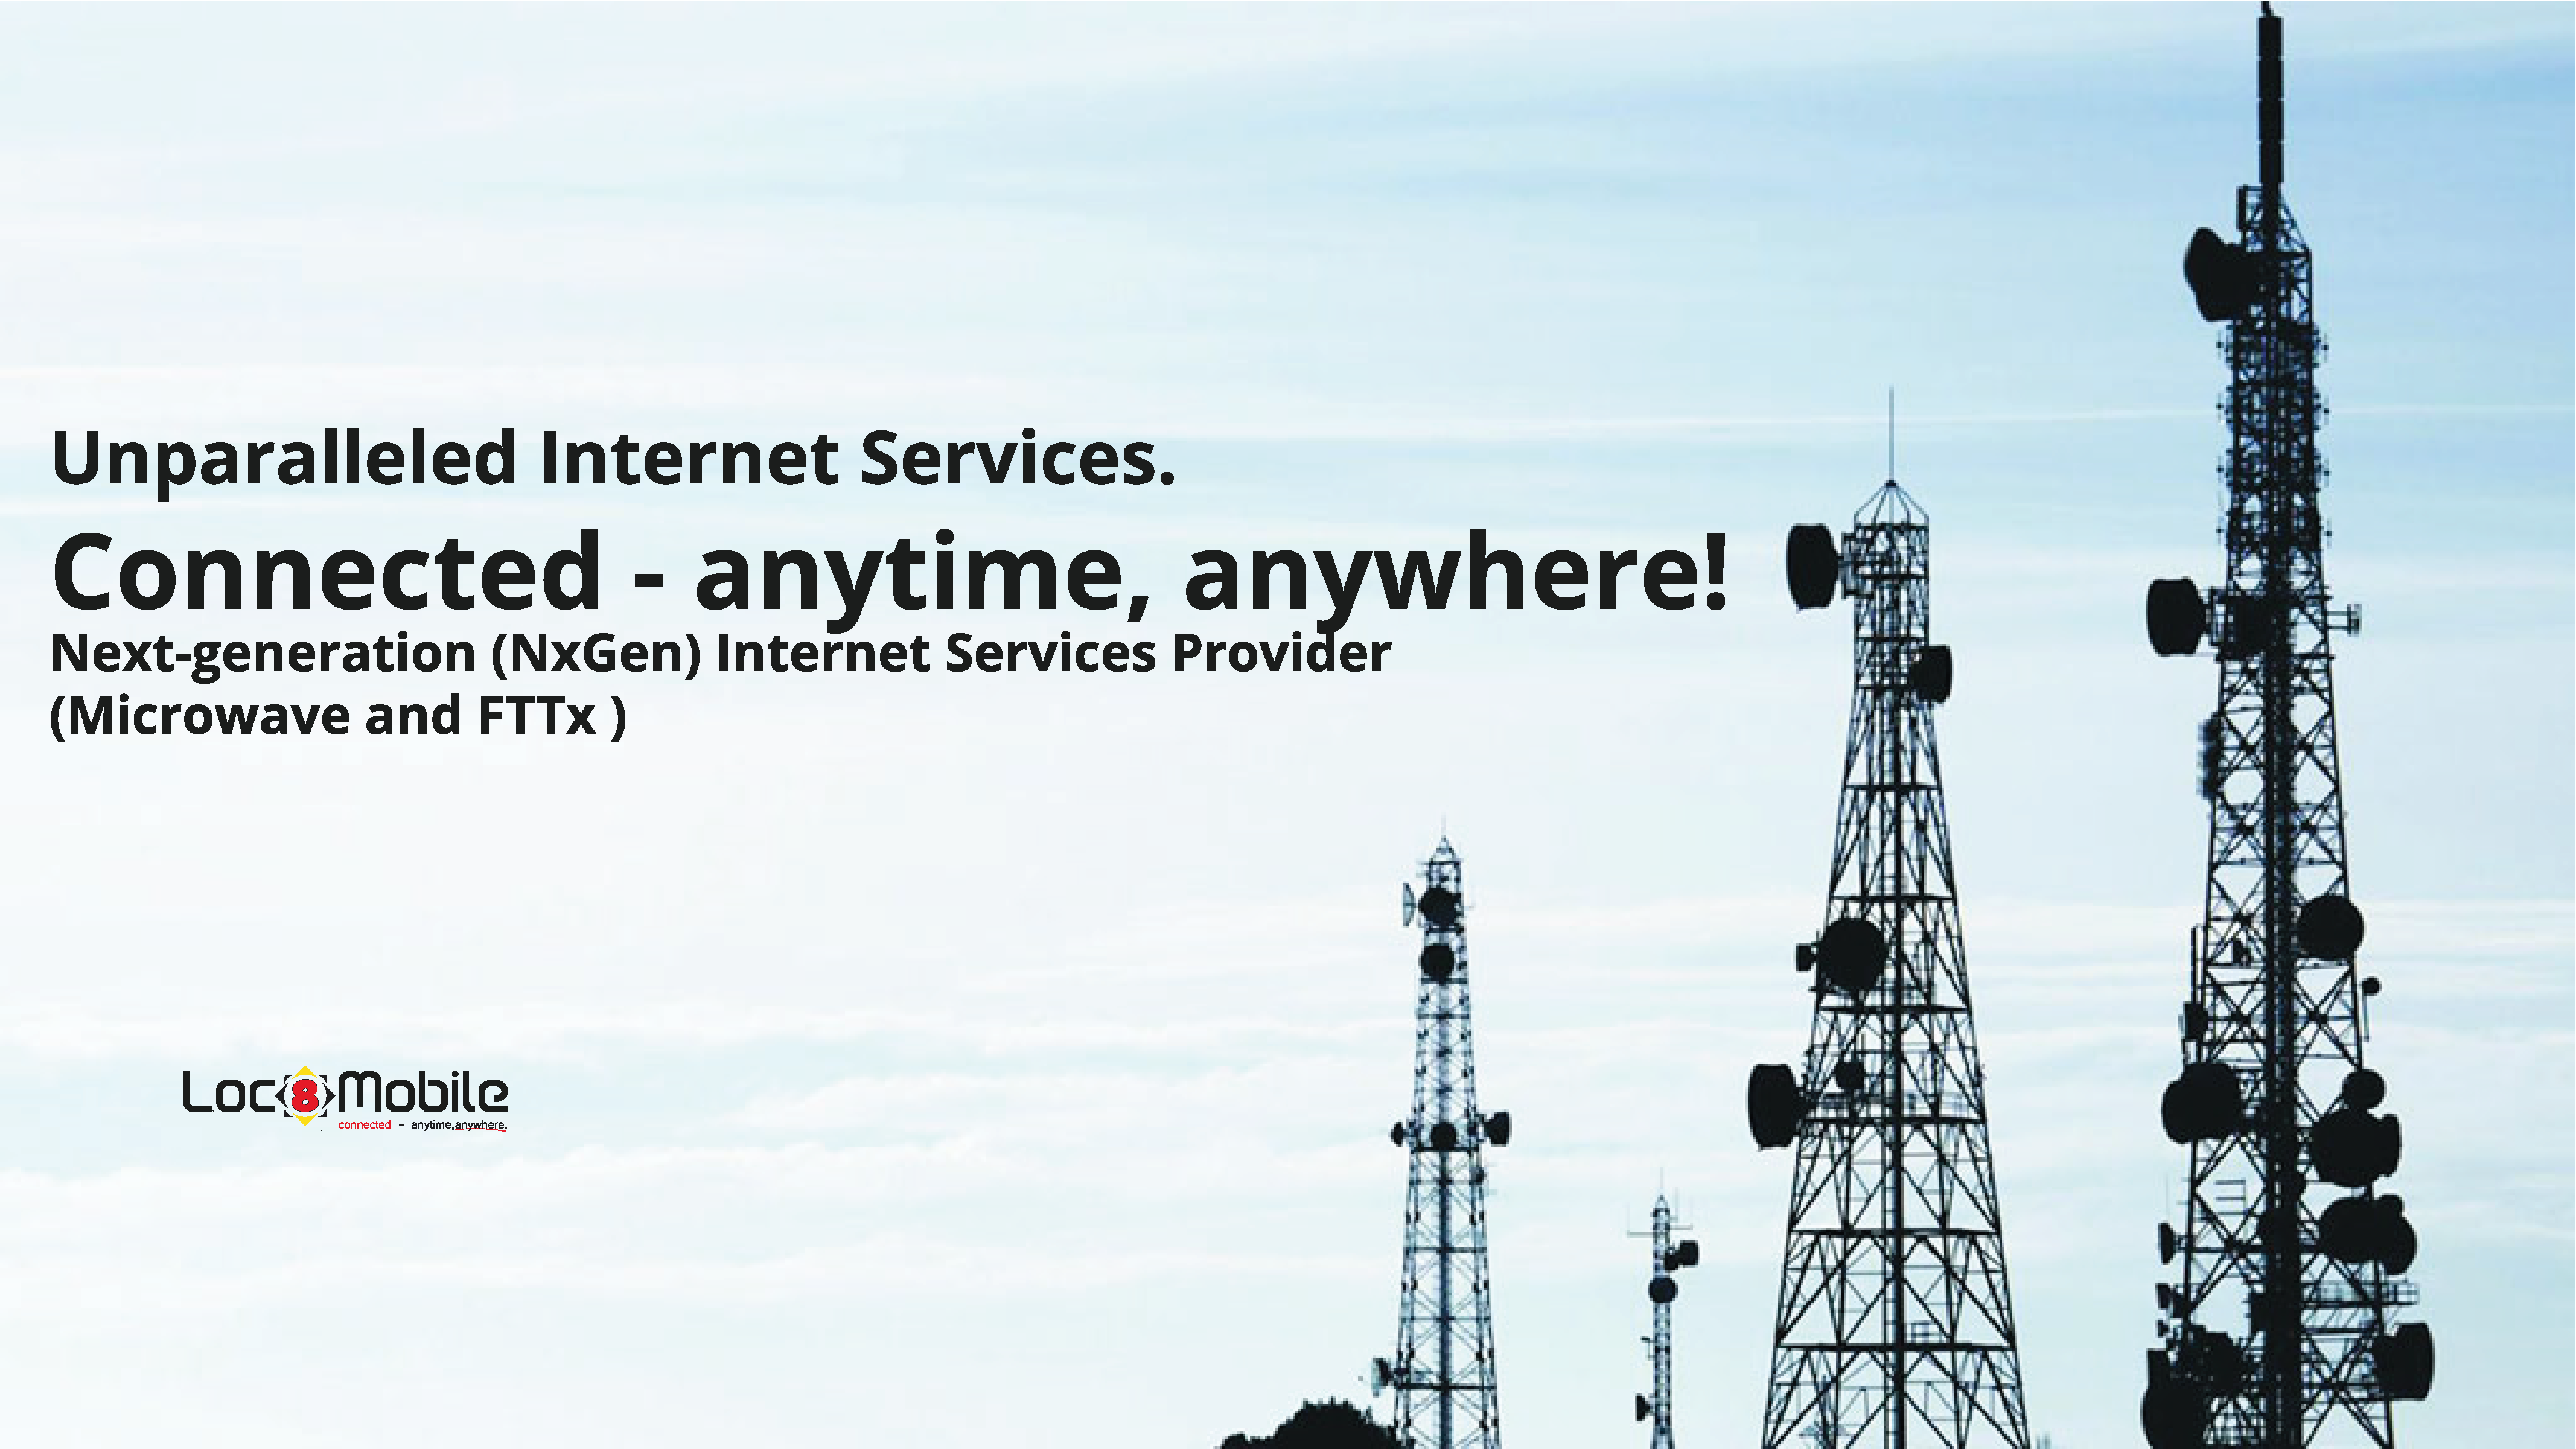 Unparalleled Internet Services in Namibia